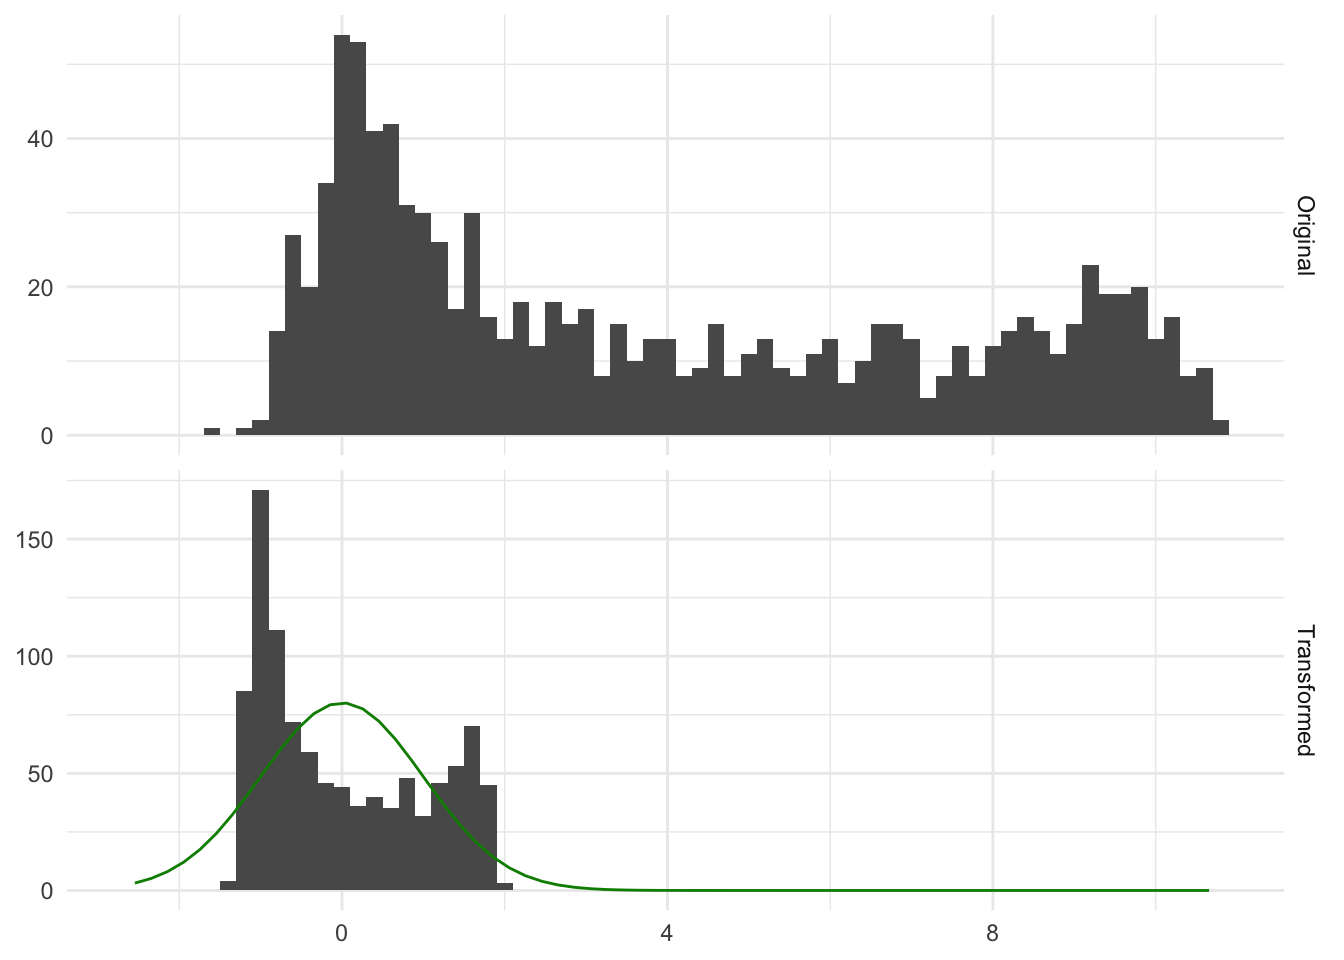 2 histograms of distribution one above the other. The top distribution shows a bimodal distribution. Below is the same distribution after being normalized. Both appear clearly non-normally distributed. The green curve is overlaid lower histogram. It doesn't follow.